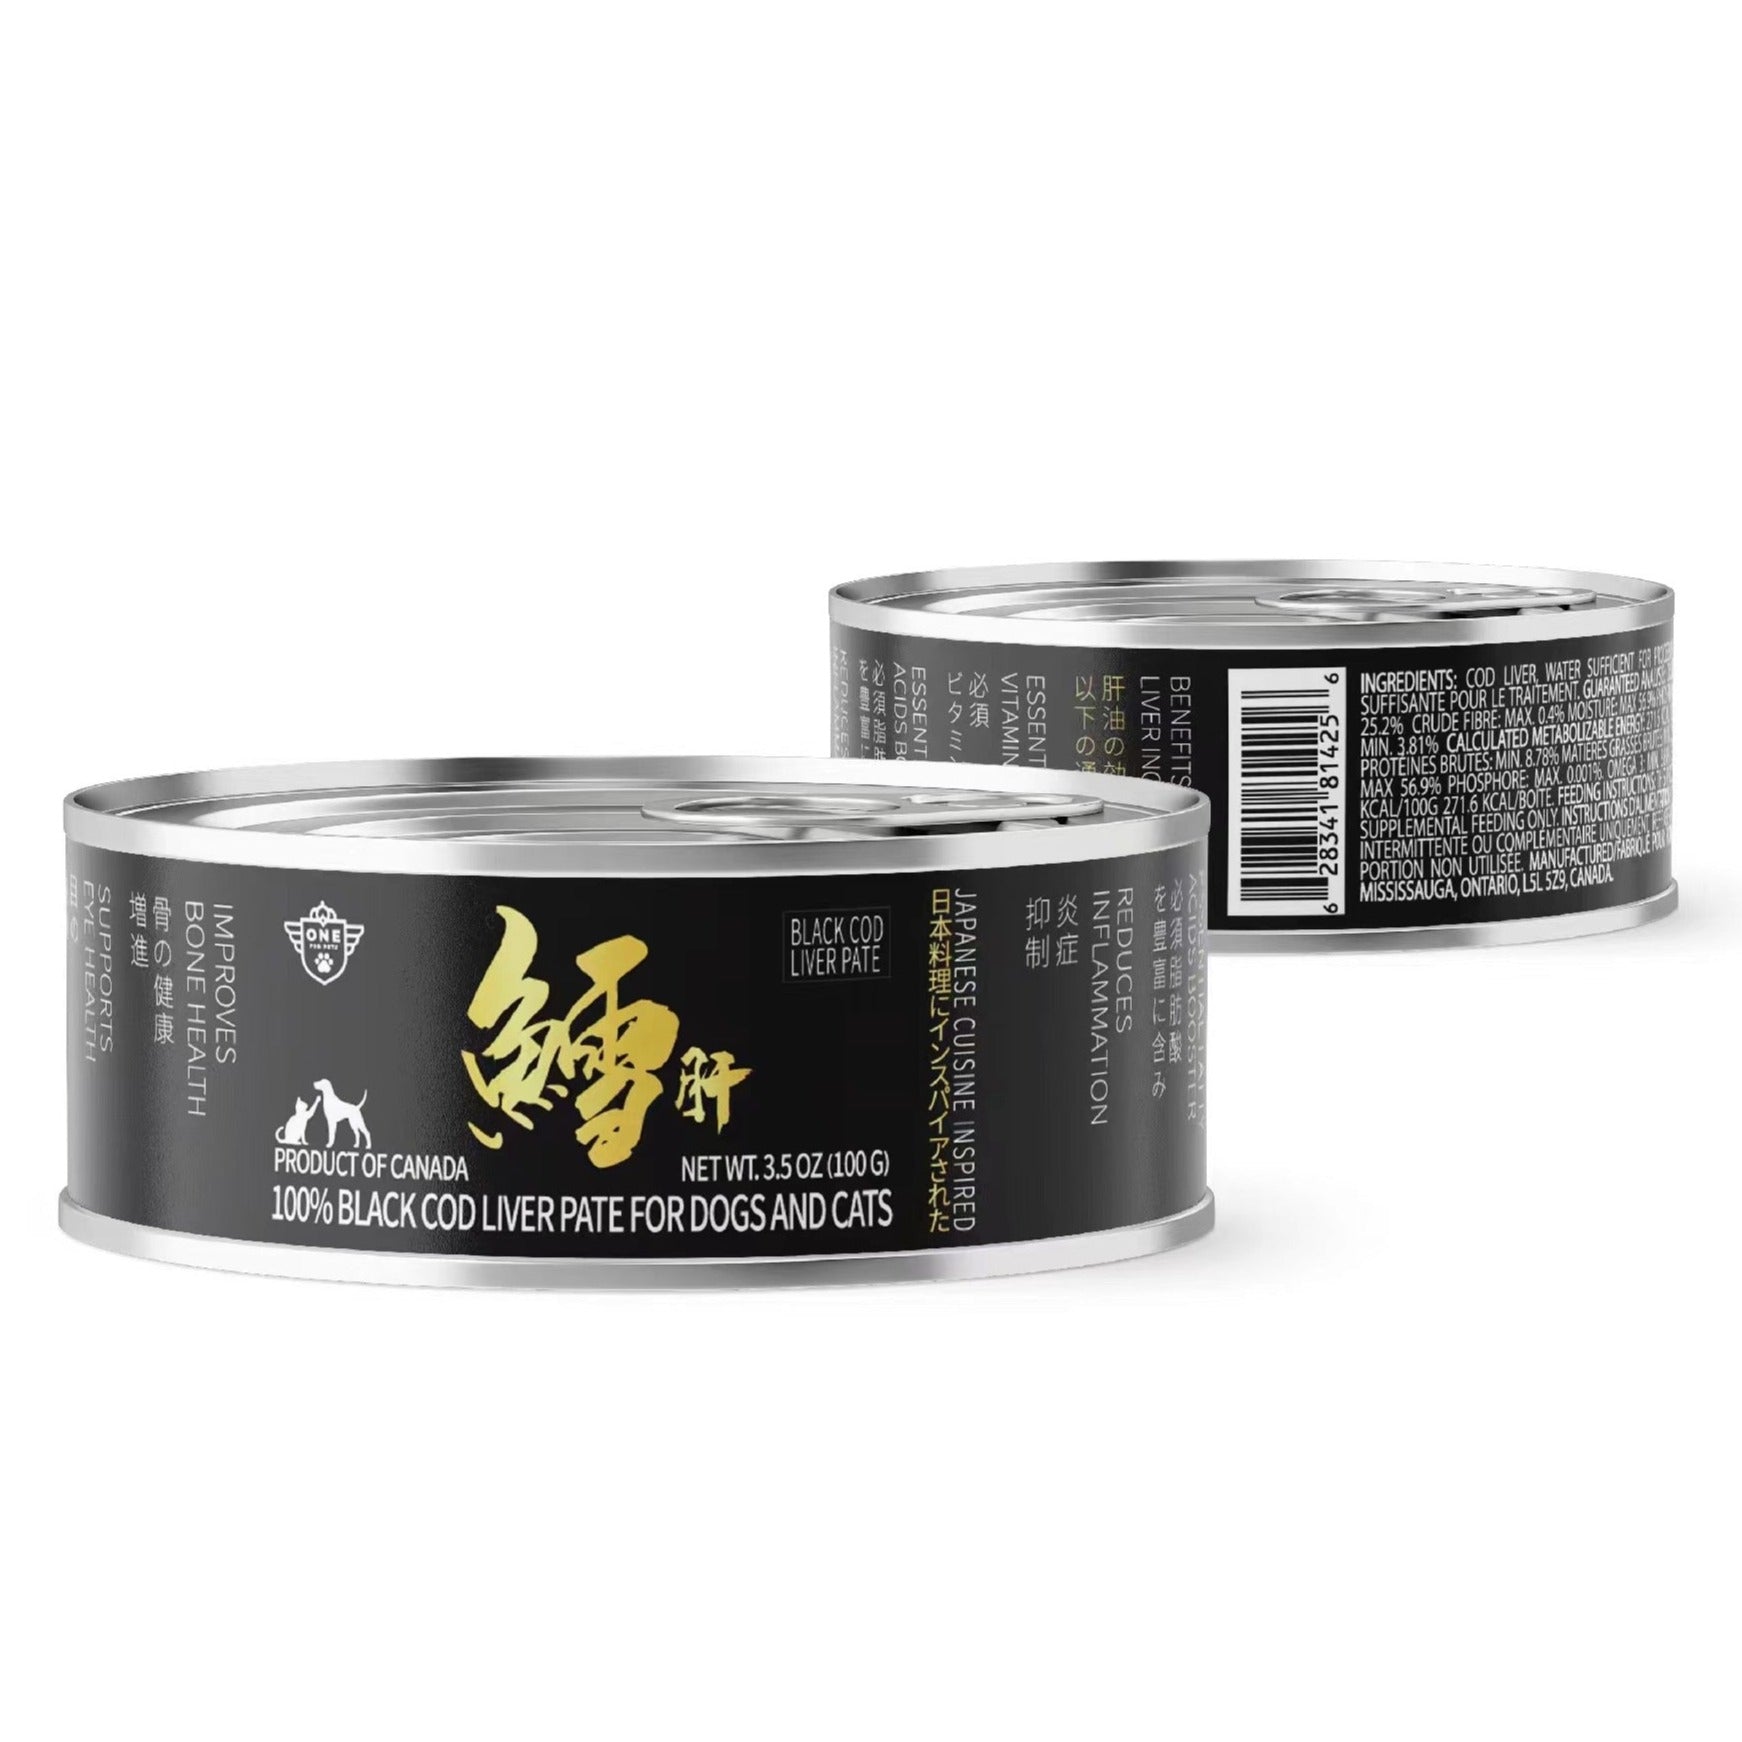 One For Pets - 100% Canadian Black Cod Liver Pate (For Both Dogs & Cats) | Wet Food for Pets